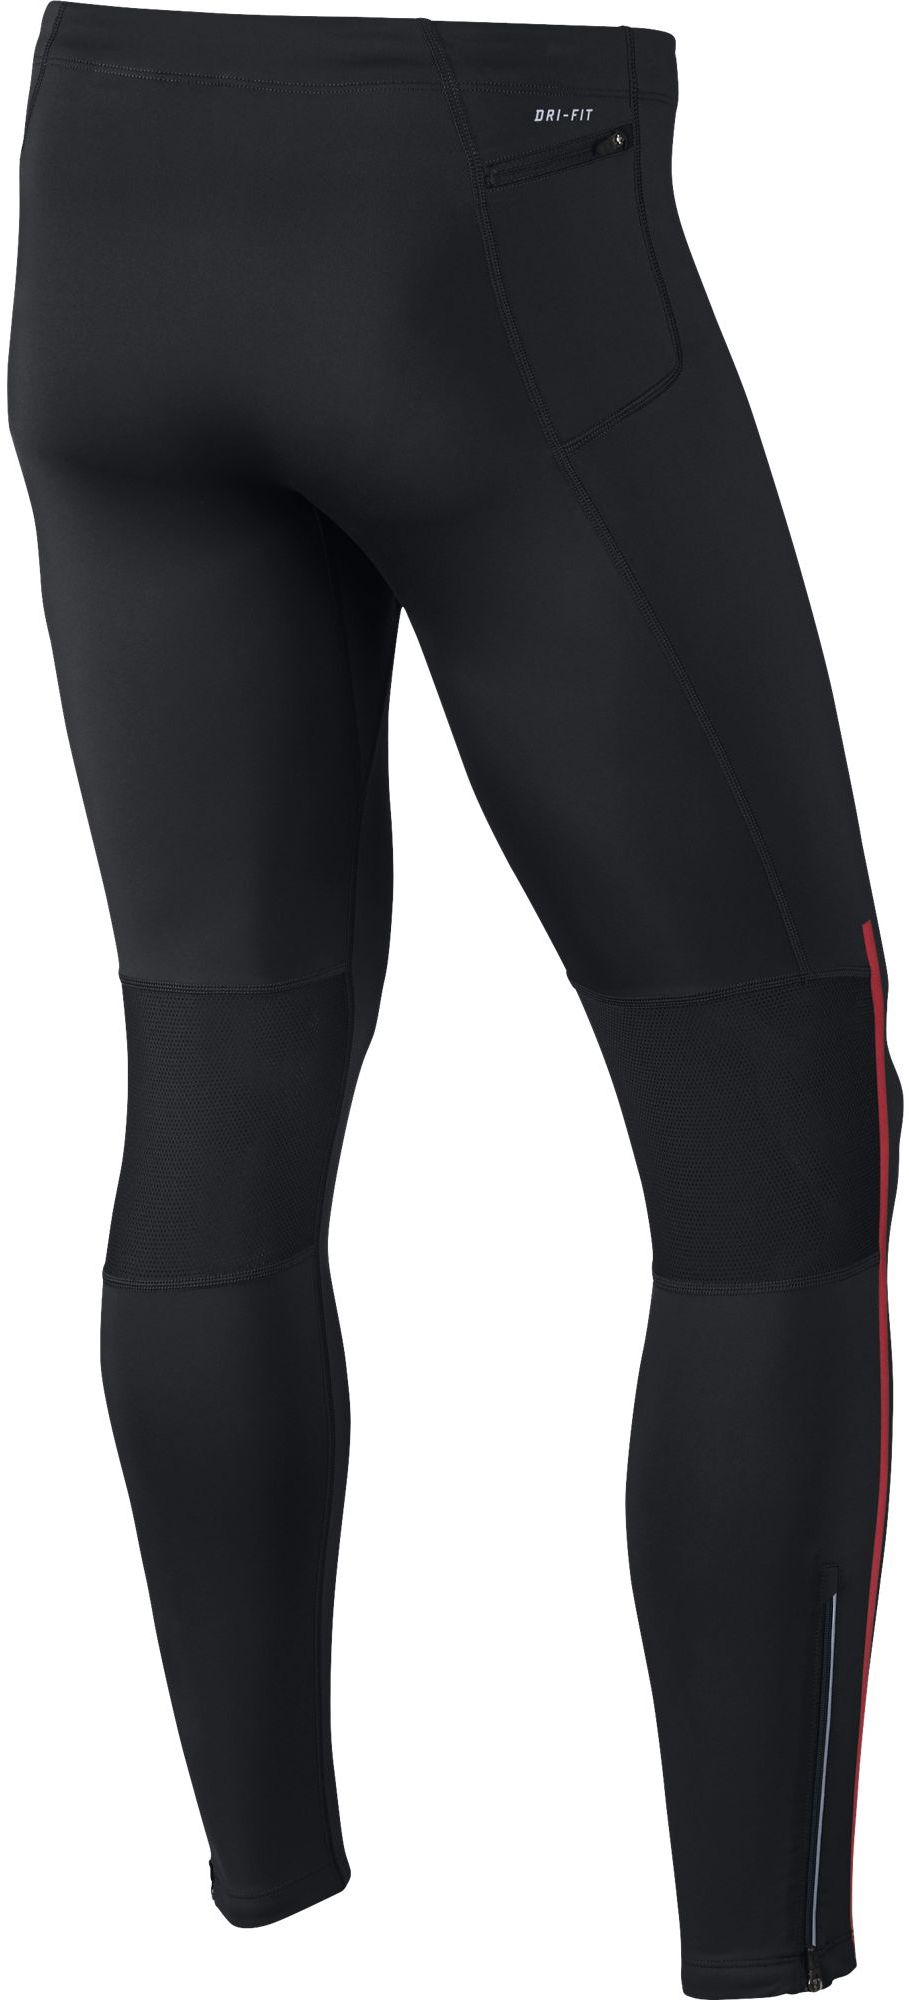 TECH TIGHT - Men´s elasticated trousers